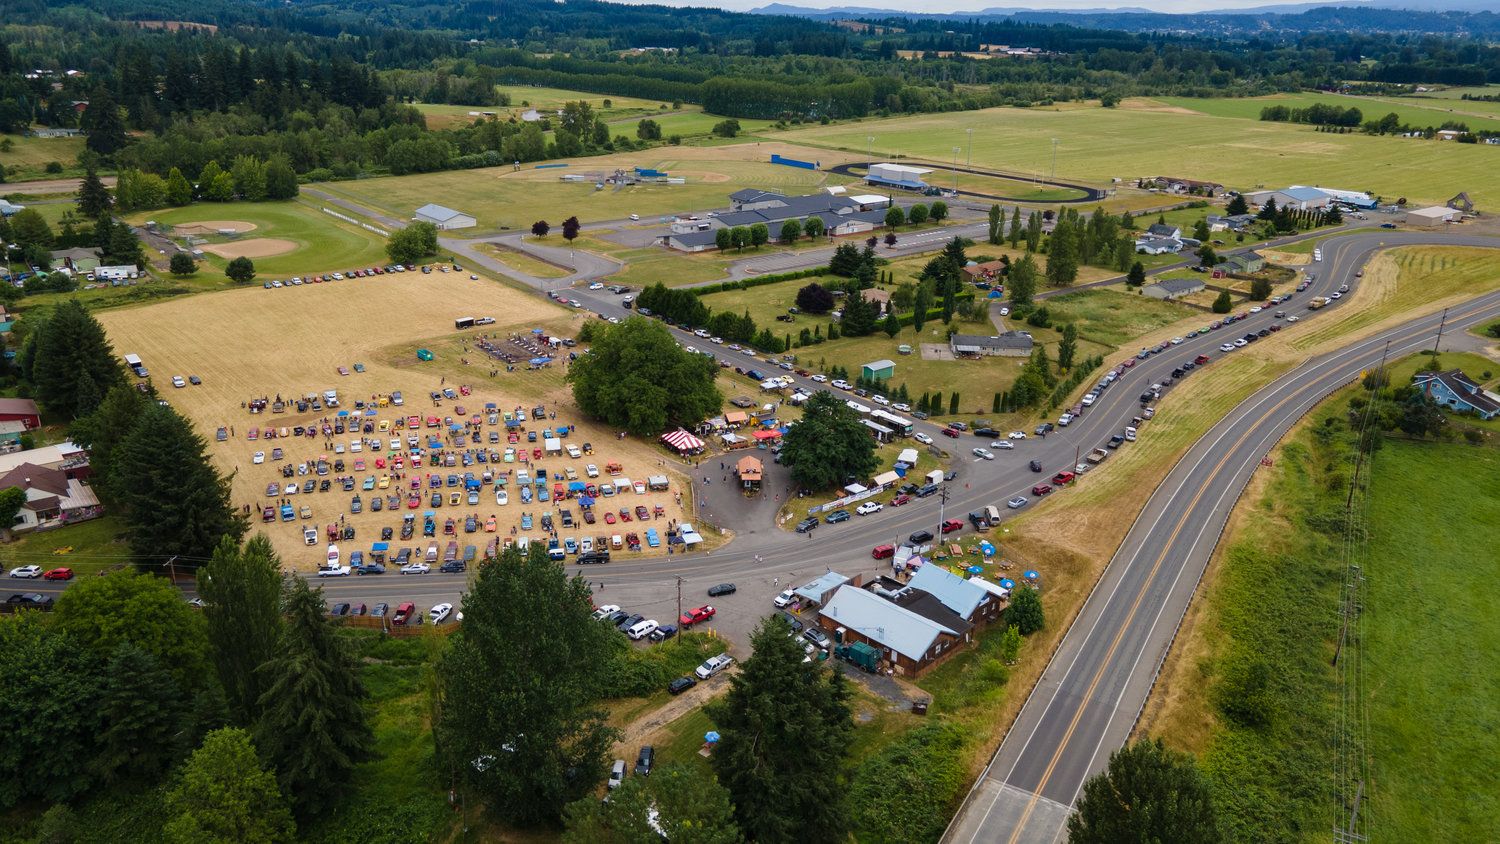 captured this photograph of the Adna Car Show from above over the weekend.